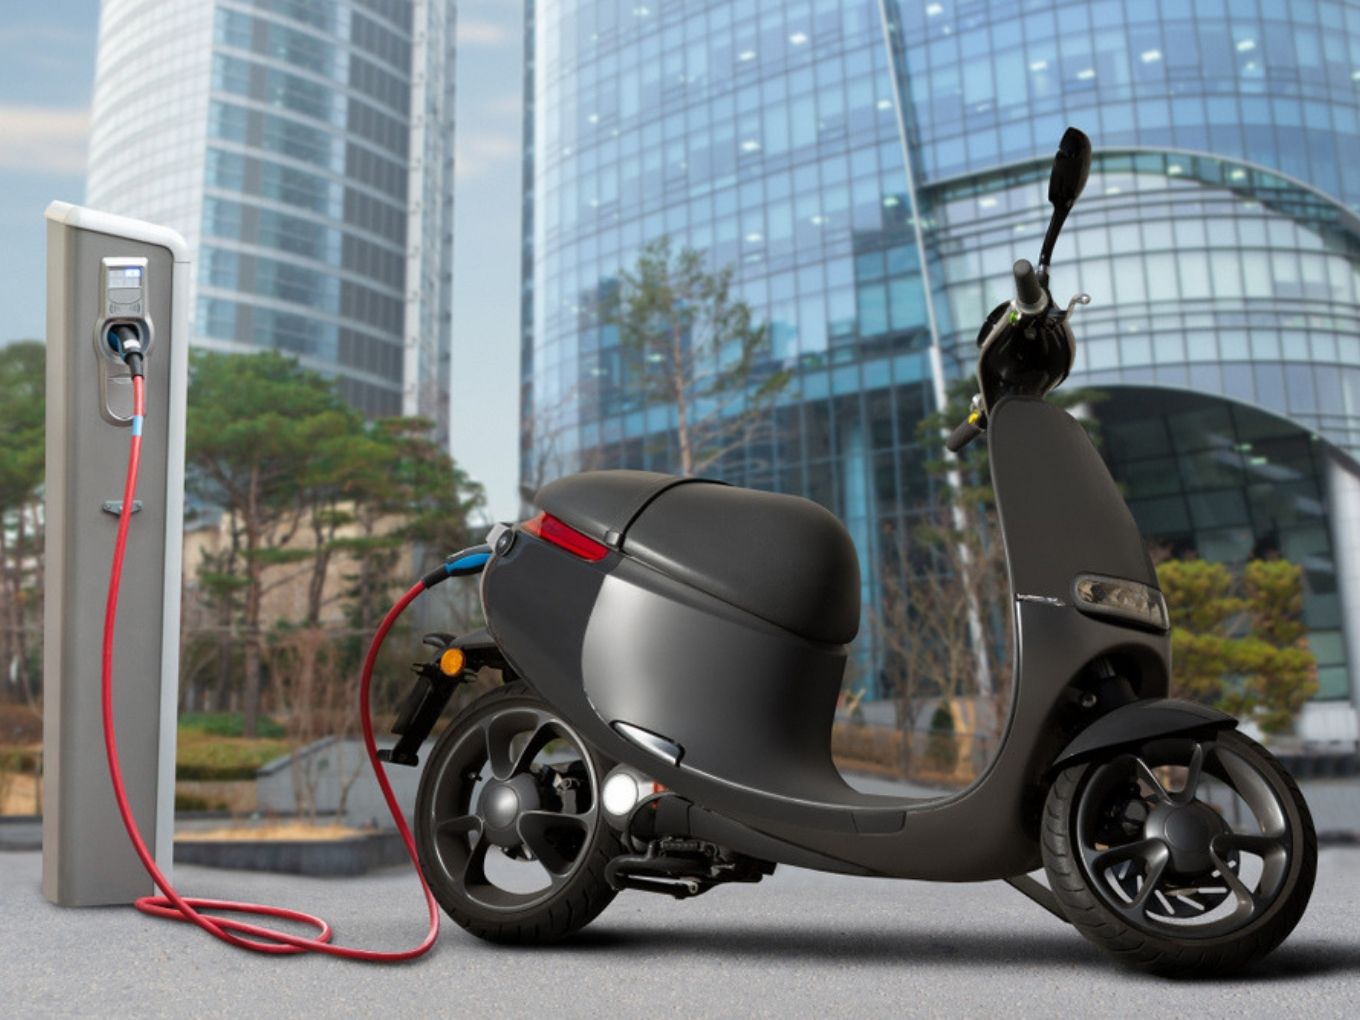 Electric Scooter Sales Dry Up As FAME 2 Regulations Play Spoilsport